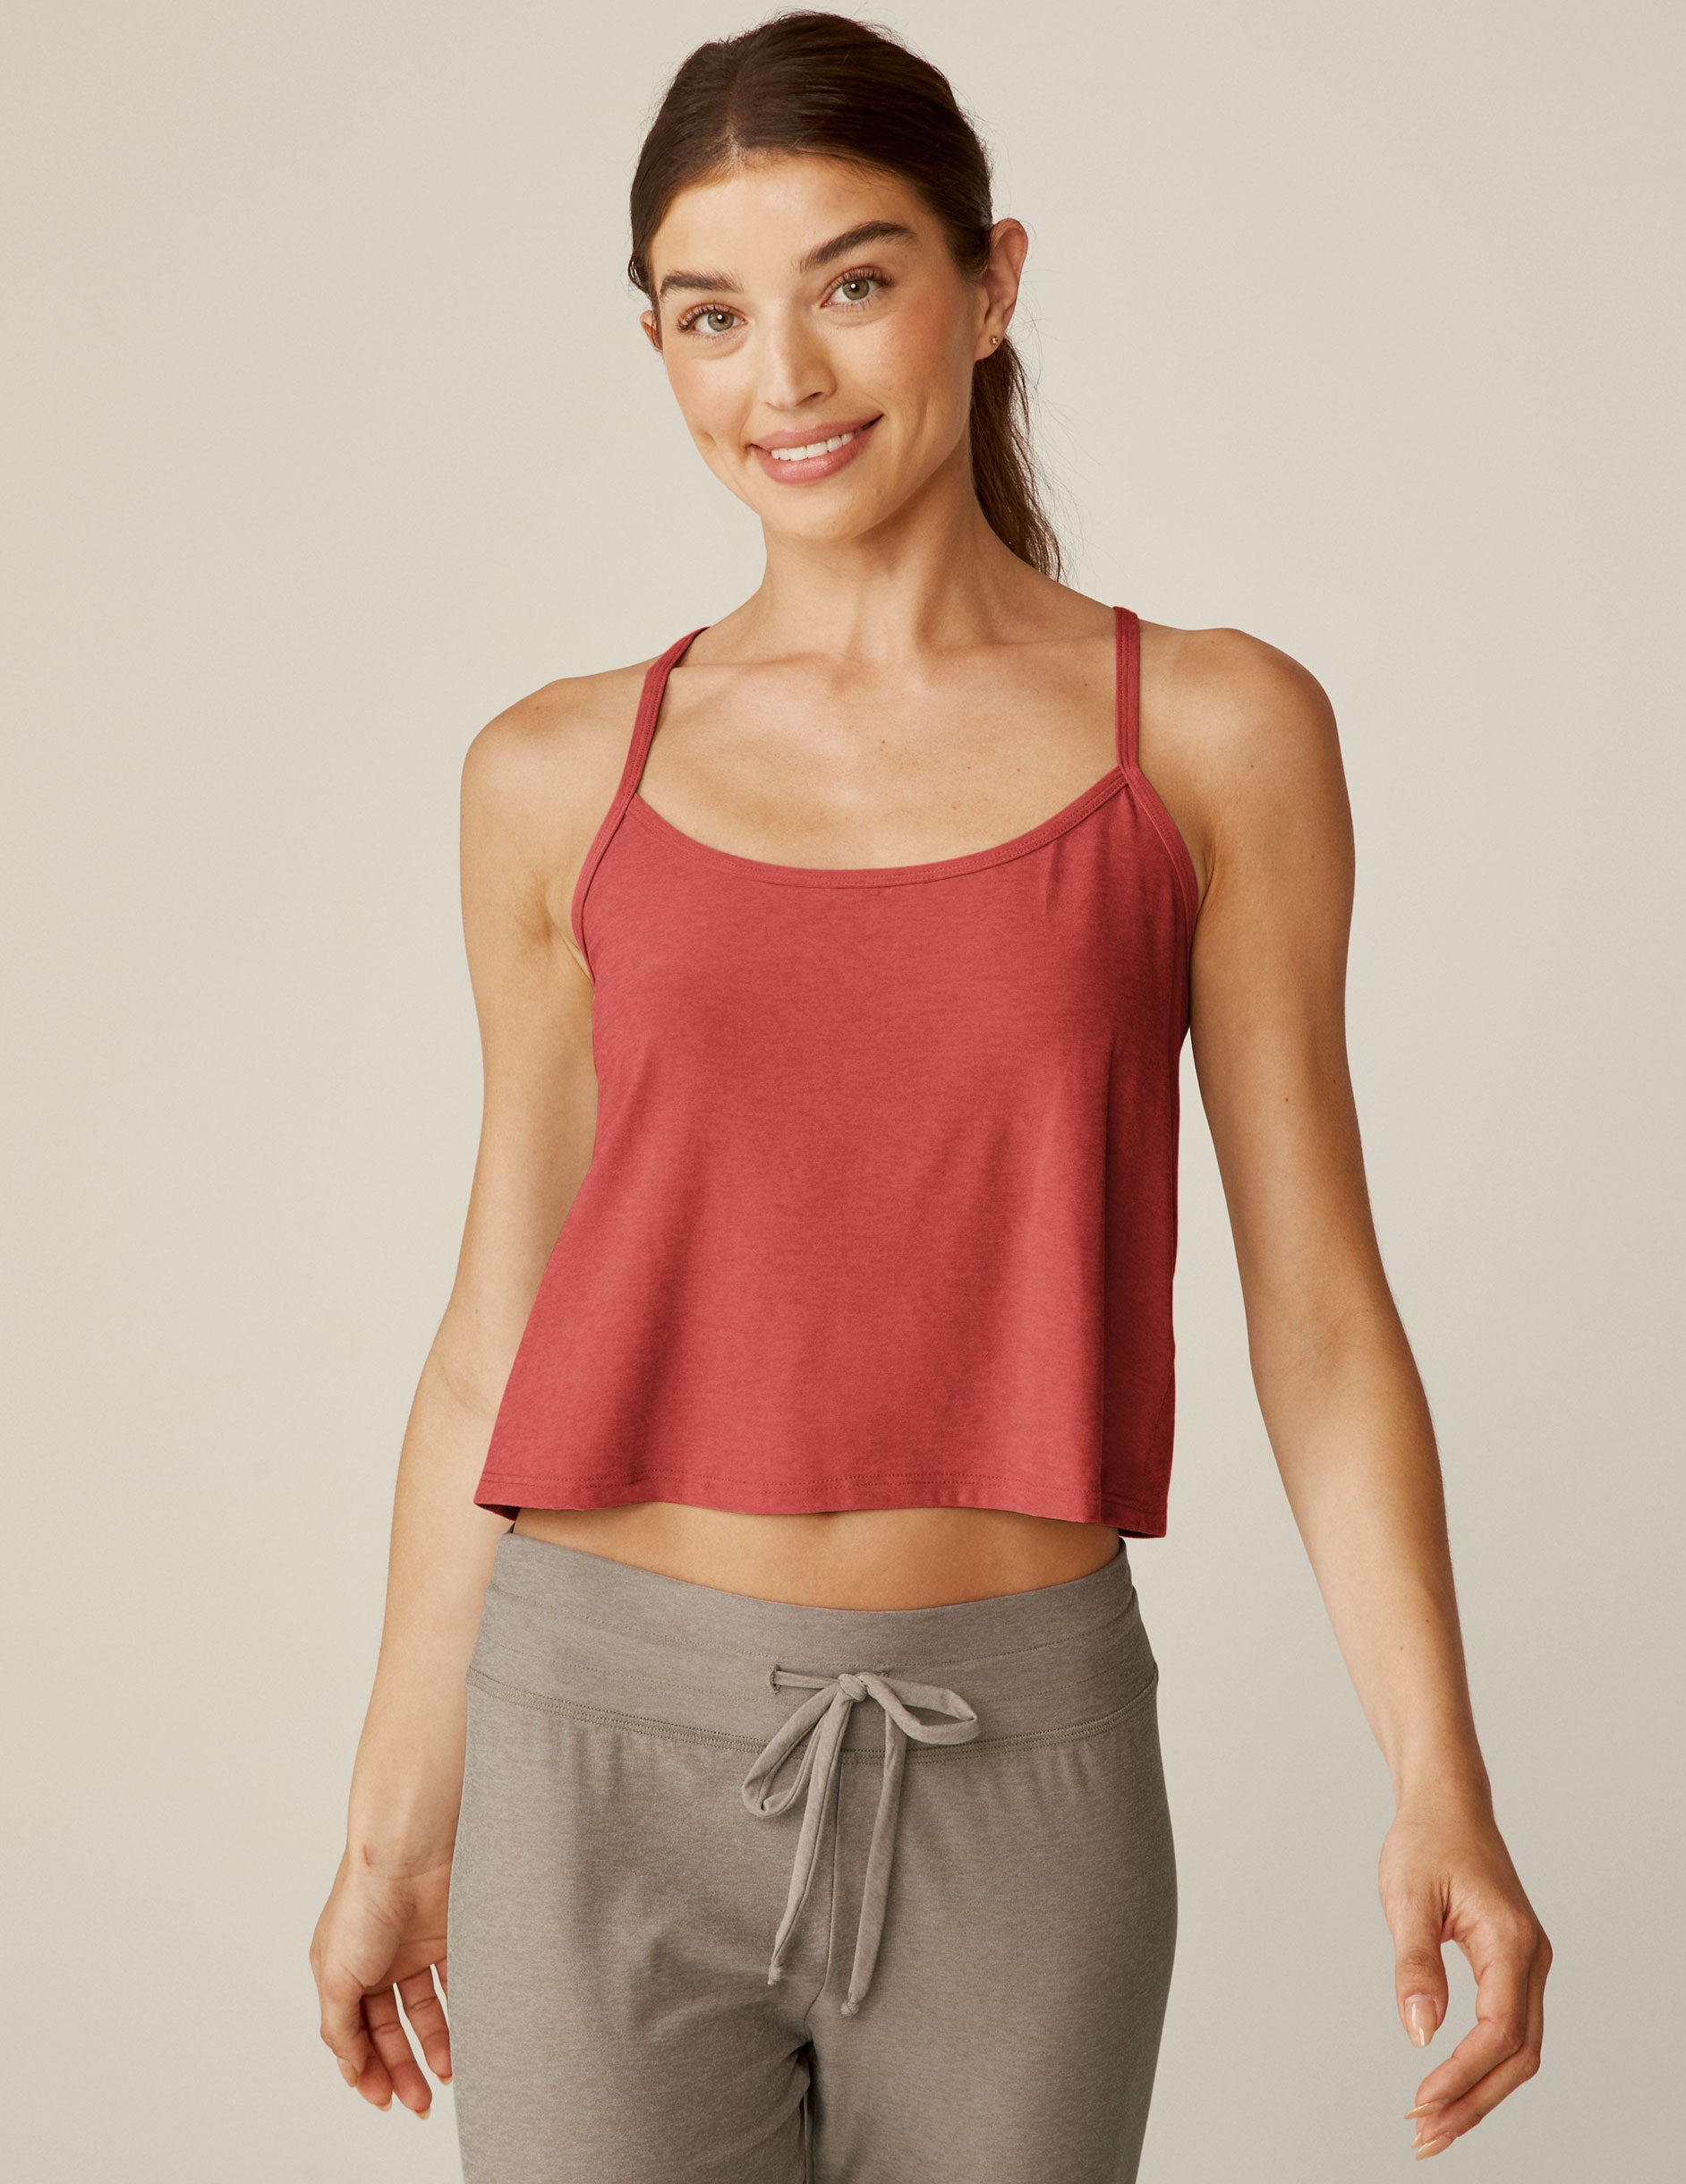 red sleep tank with criss cross strap design in back